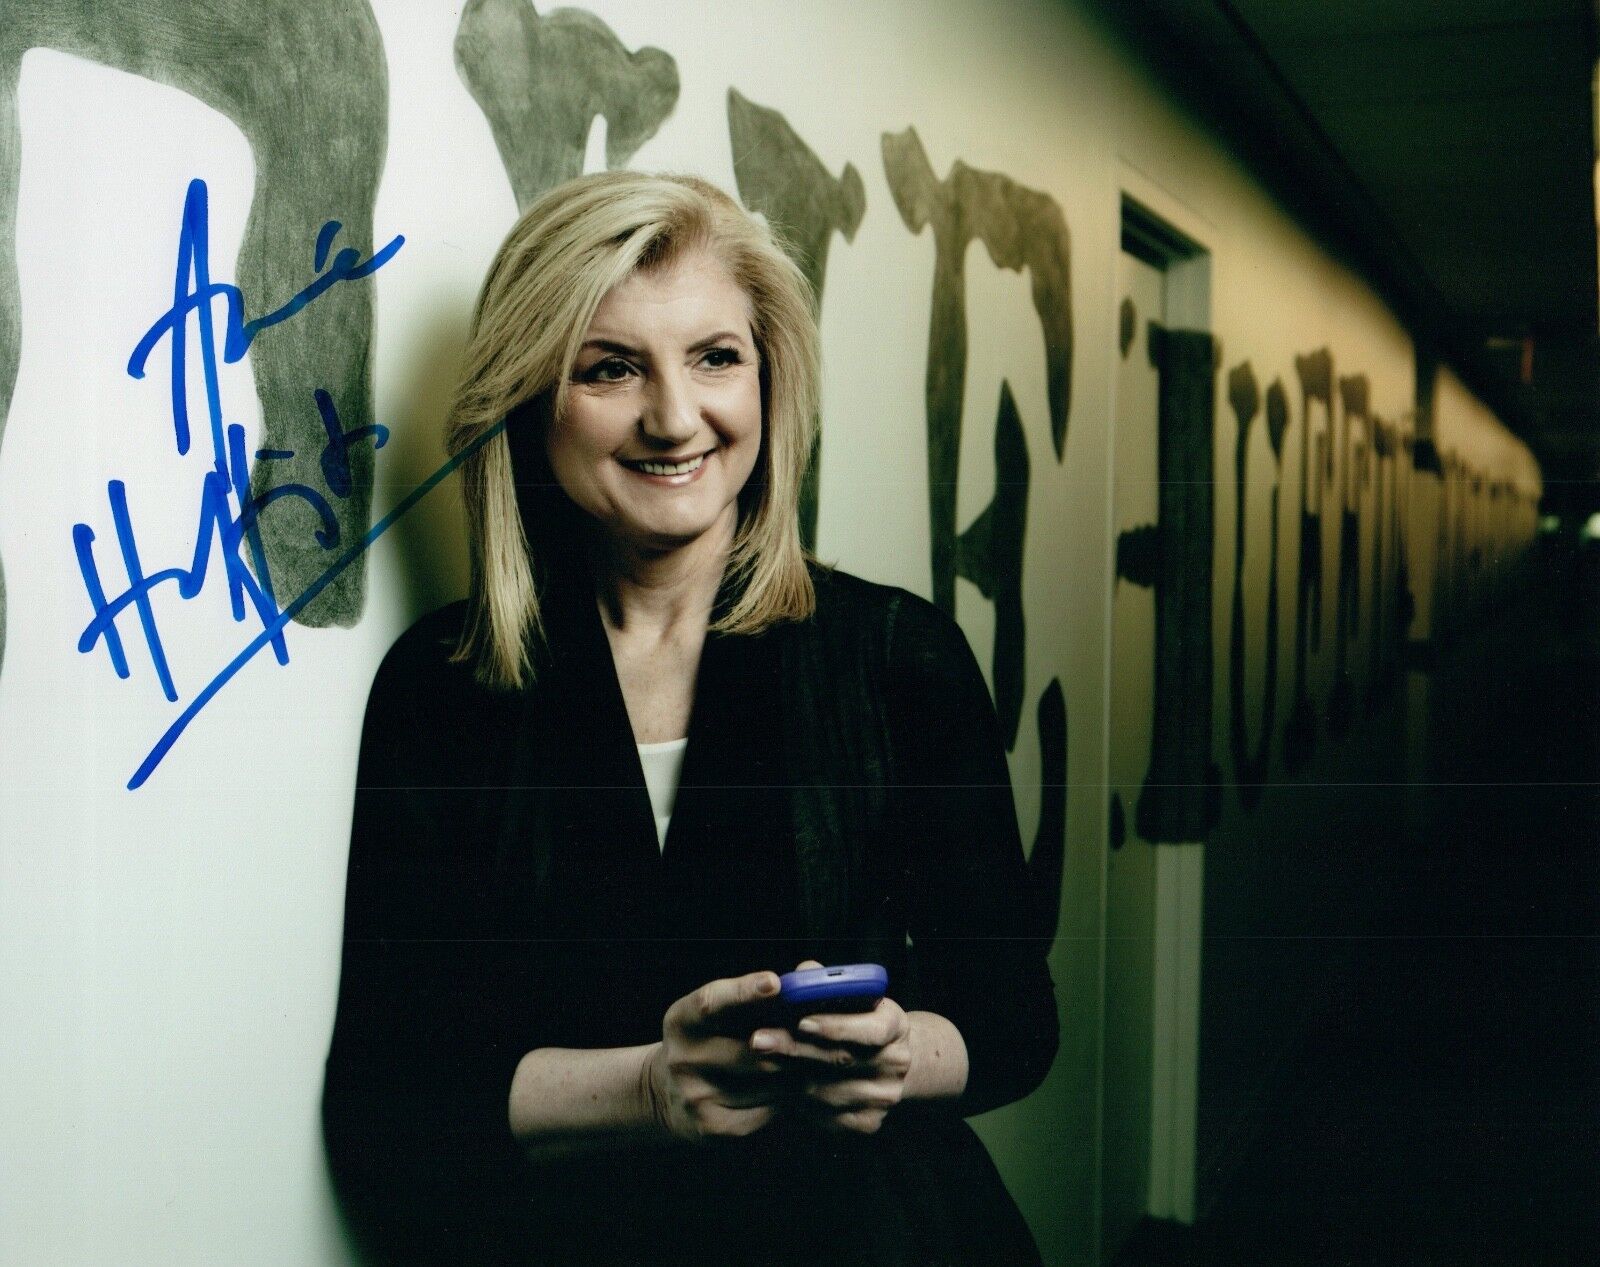 Arianna Huffington Signed Autographed 8x10 Photo Poster painting The Huffington Post COA VD